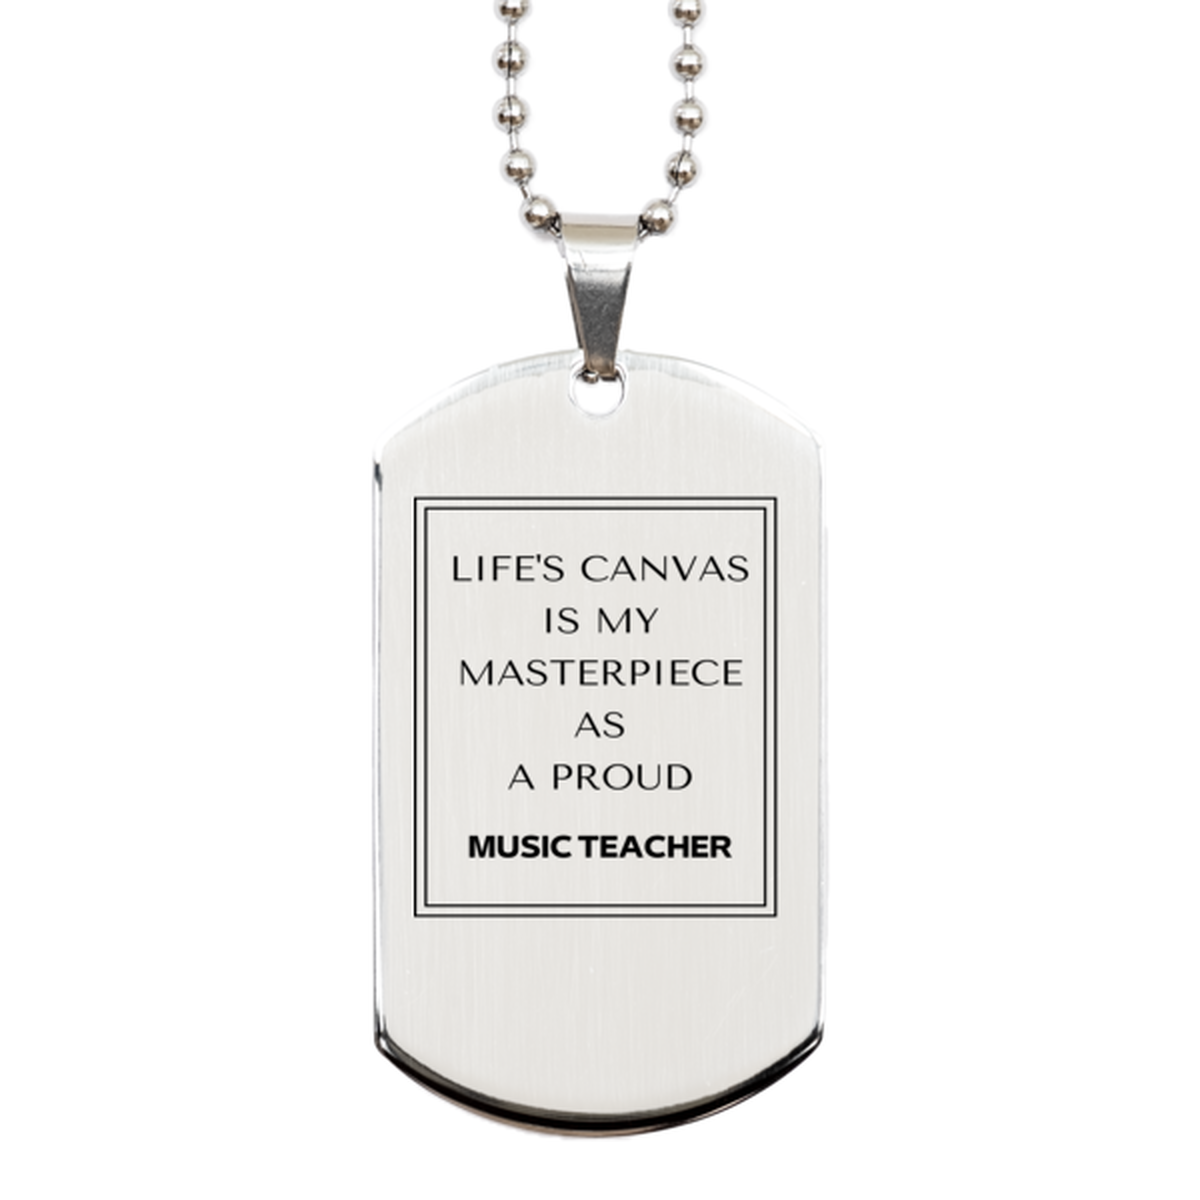 Proud Music Teacher Gifts, Life's canvas is my masterpiece, Epic Birthday Christmas Unique Silver Dog Tag For Music Teacher, Coworkers, Men, Women, Friends